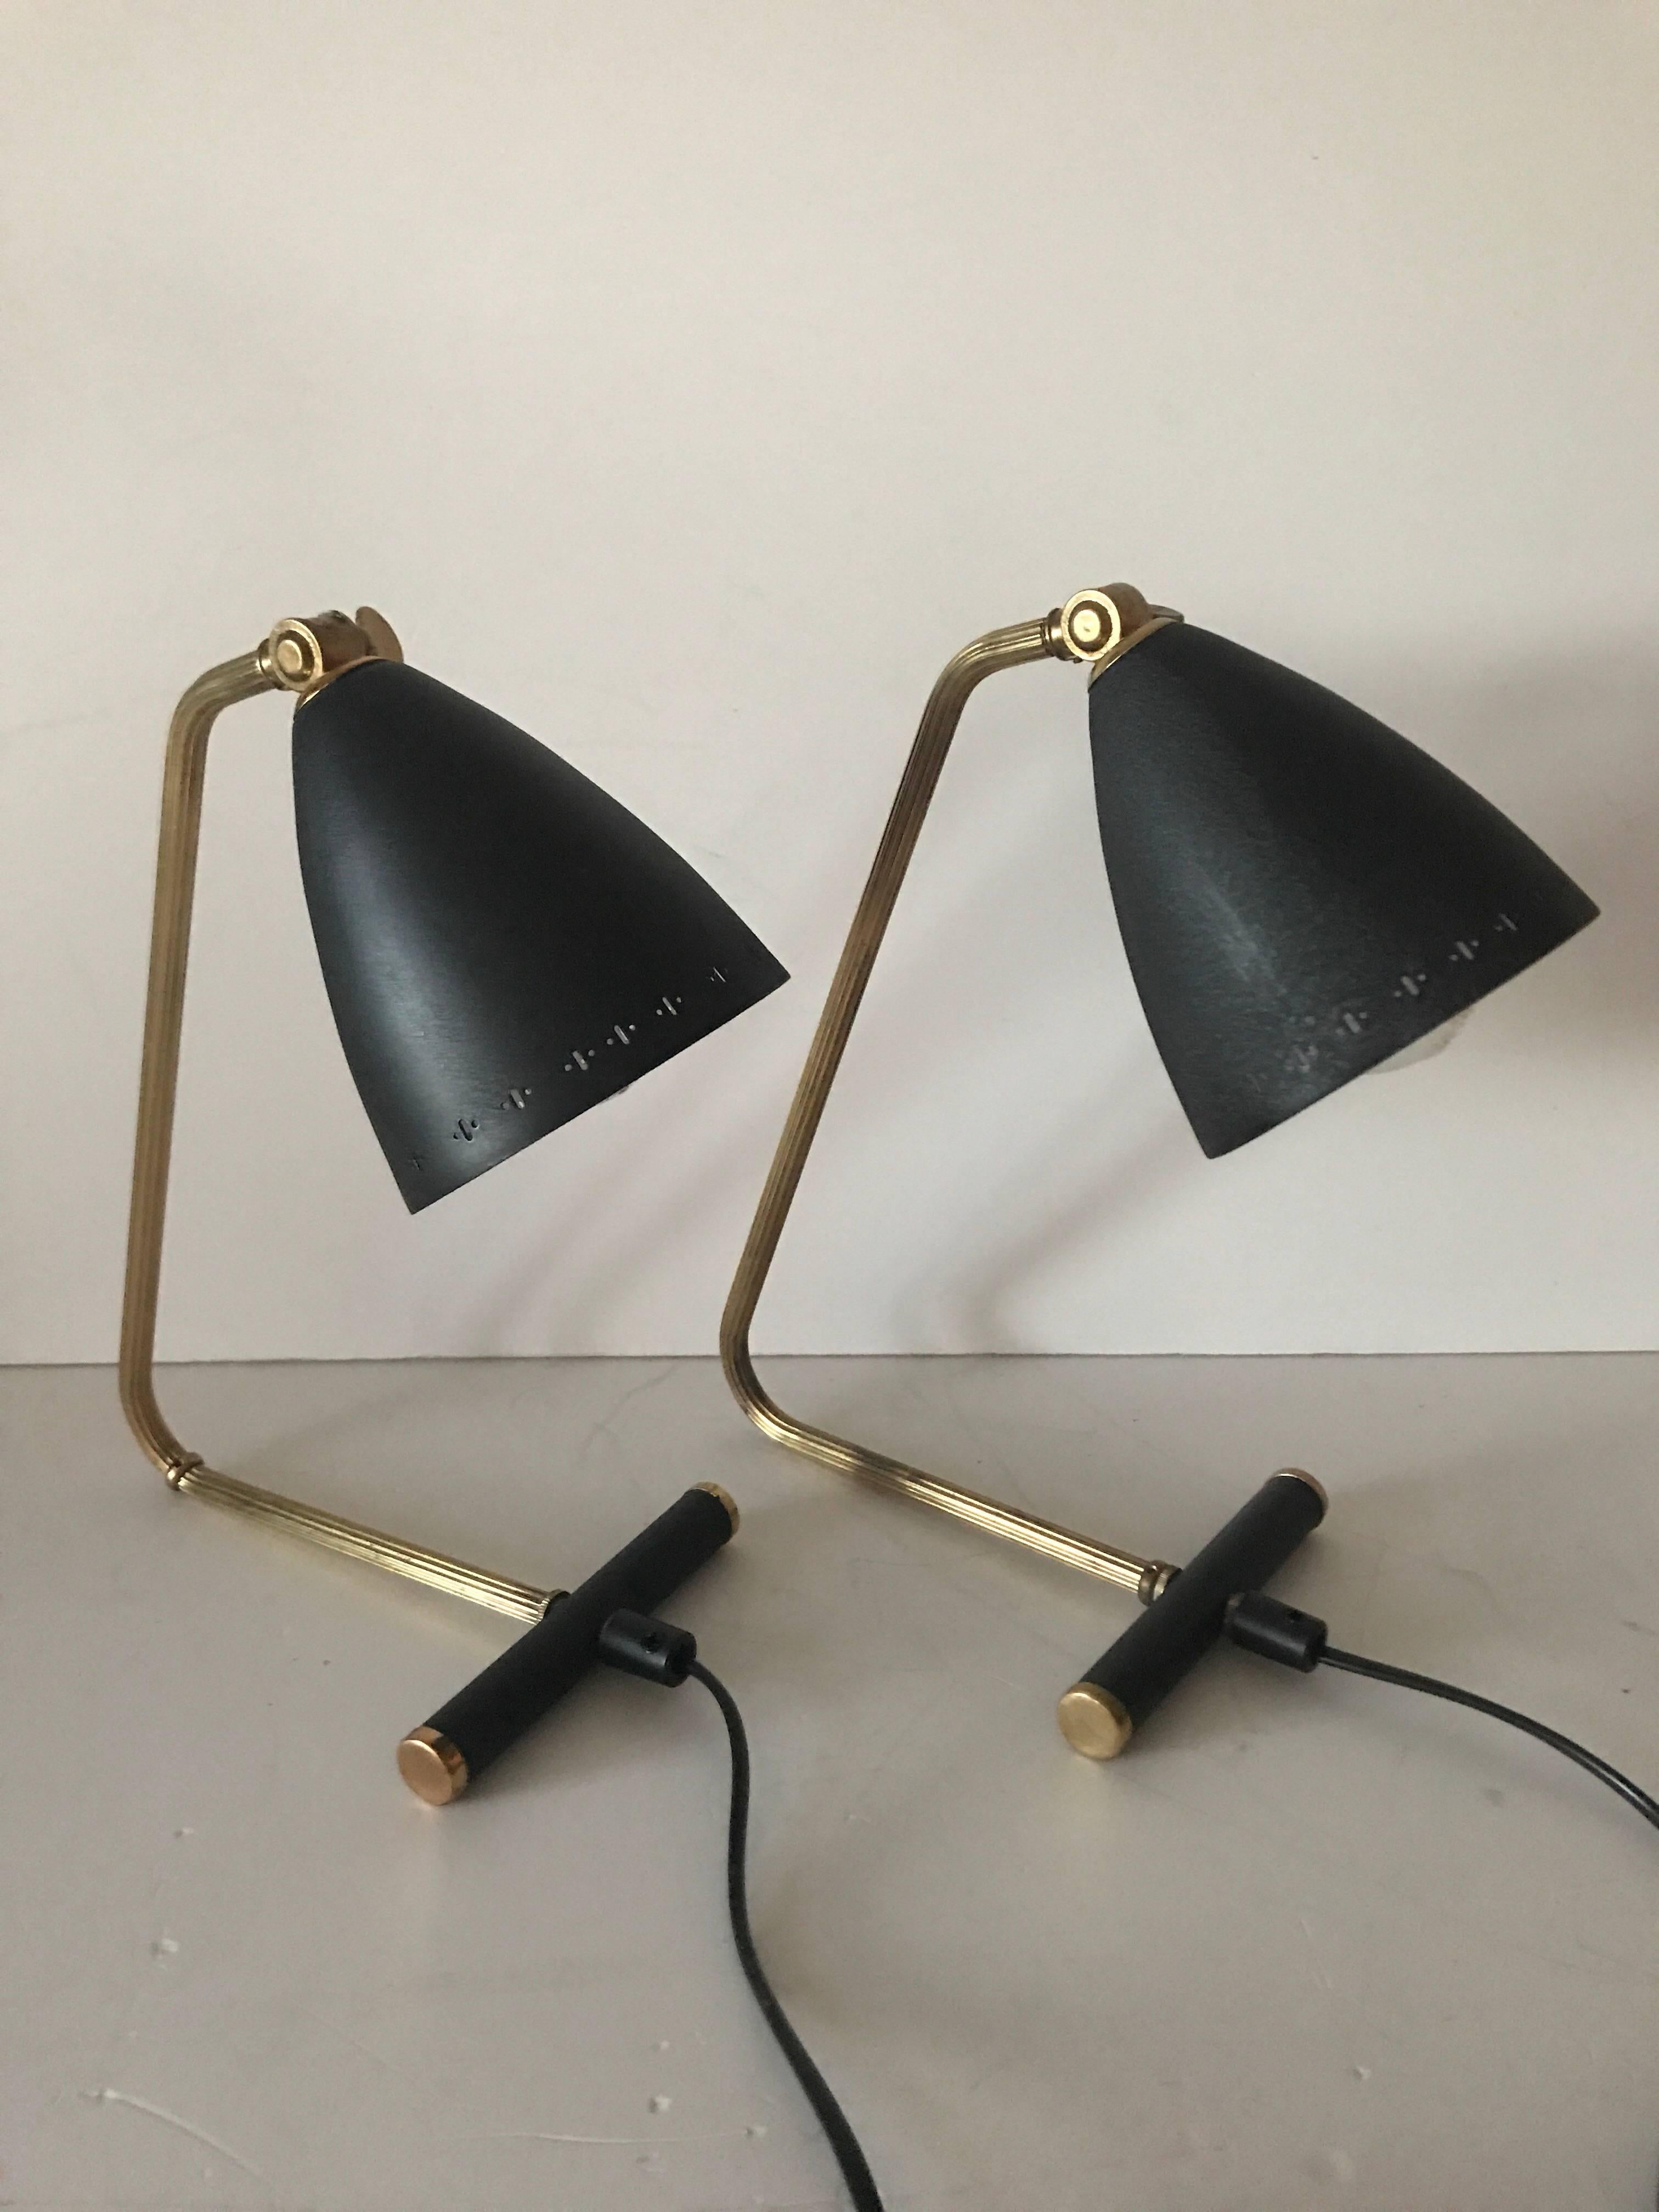 Pair of rare 1950 Swedish EWÅ metal and brass table lamps in Italian style. A very nice and rare pair of black metal and brass table lamps made by Swedish Ewå in the 1950s. This pair is in a fantastic original condition without any remarks. The